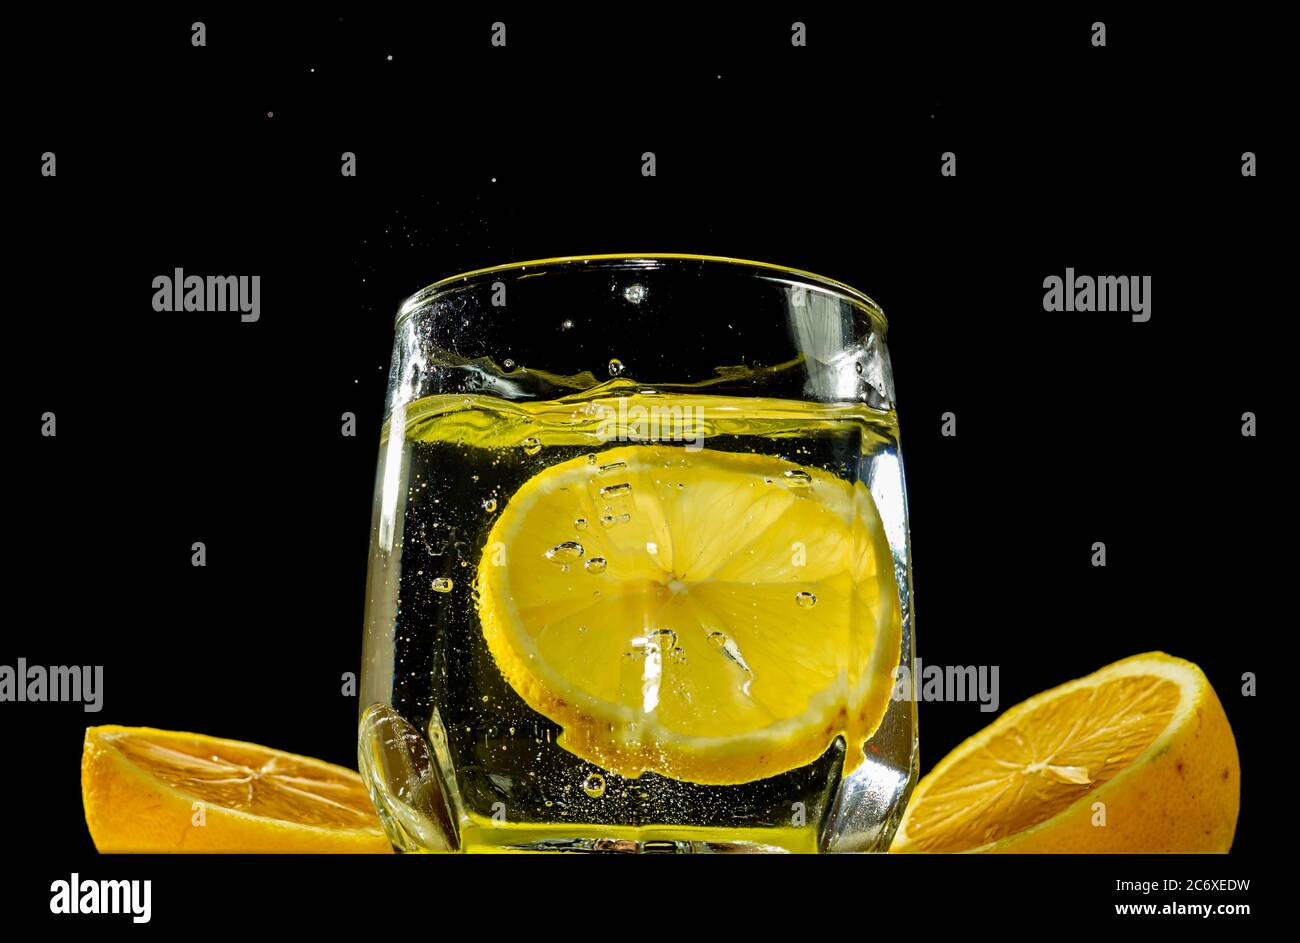 To drink, a lemon slice is thrown into a glass of soda in summer. Droplets of water splashing out of the soda front the black background Stock Photo